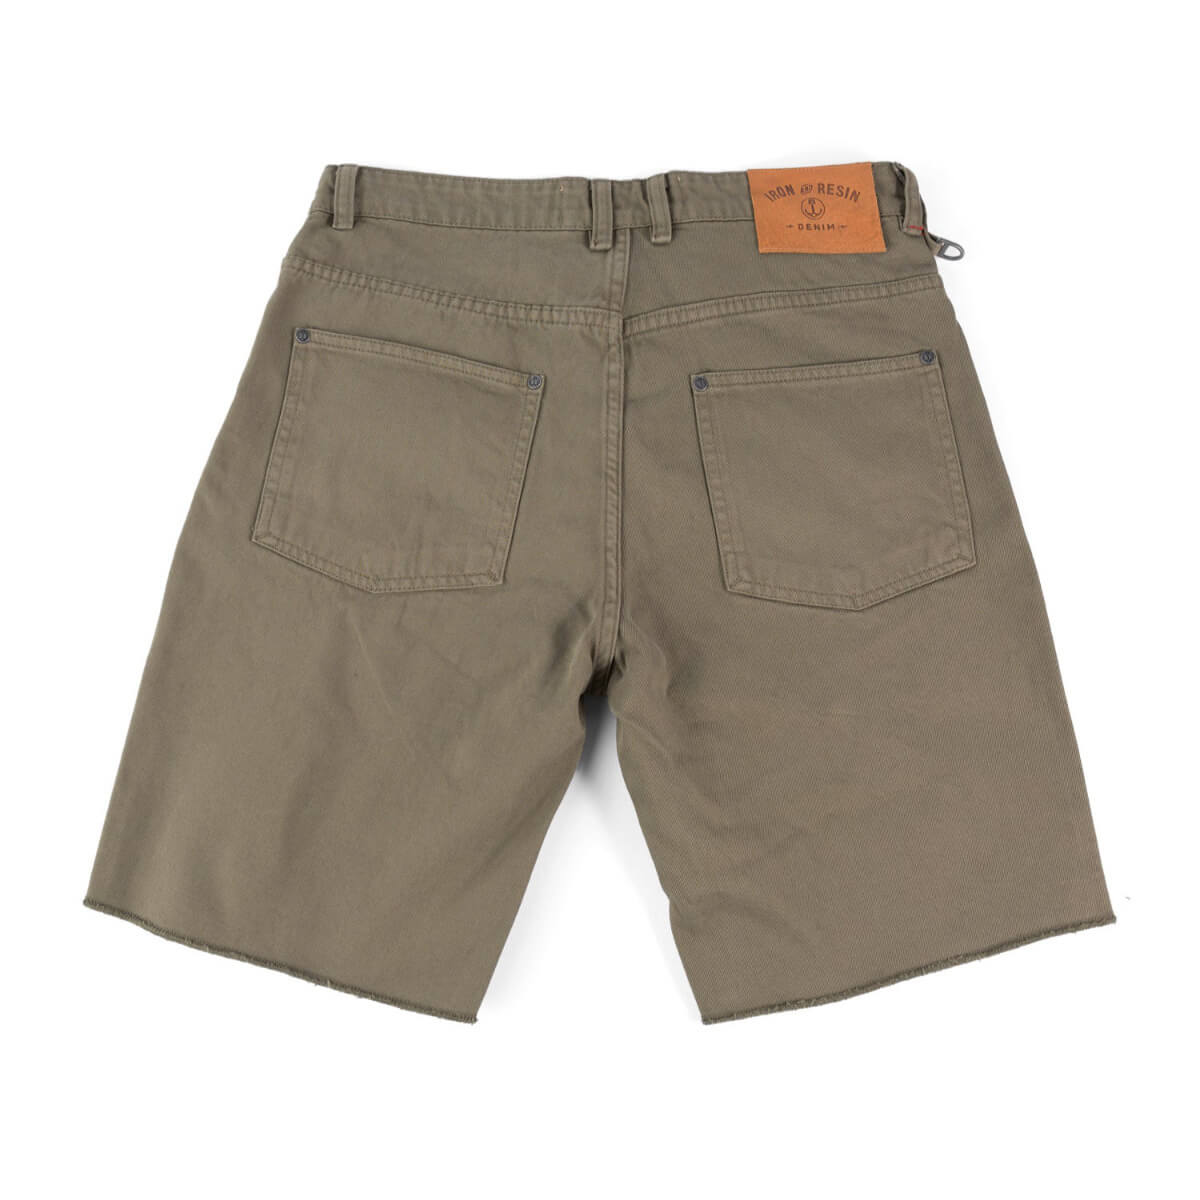 Iron and Resin Hector Shorts